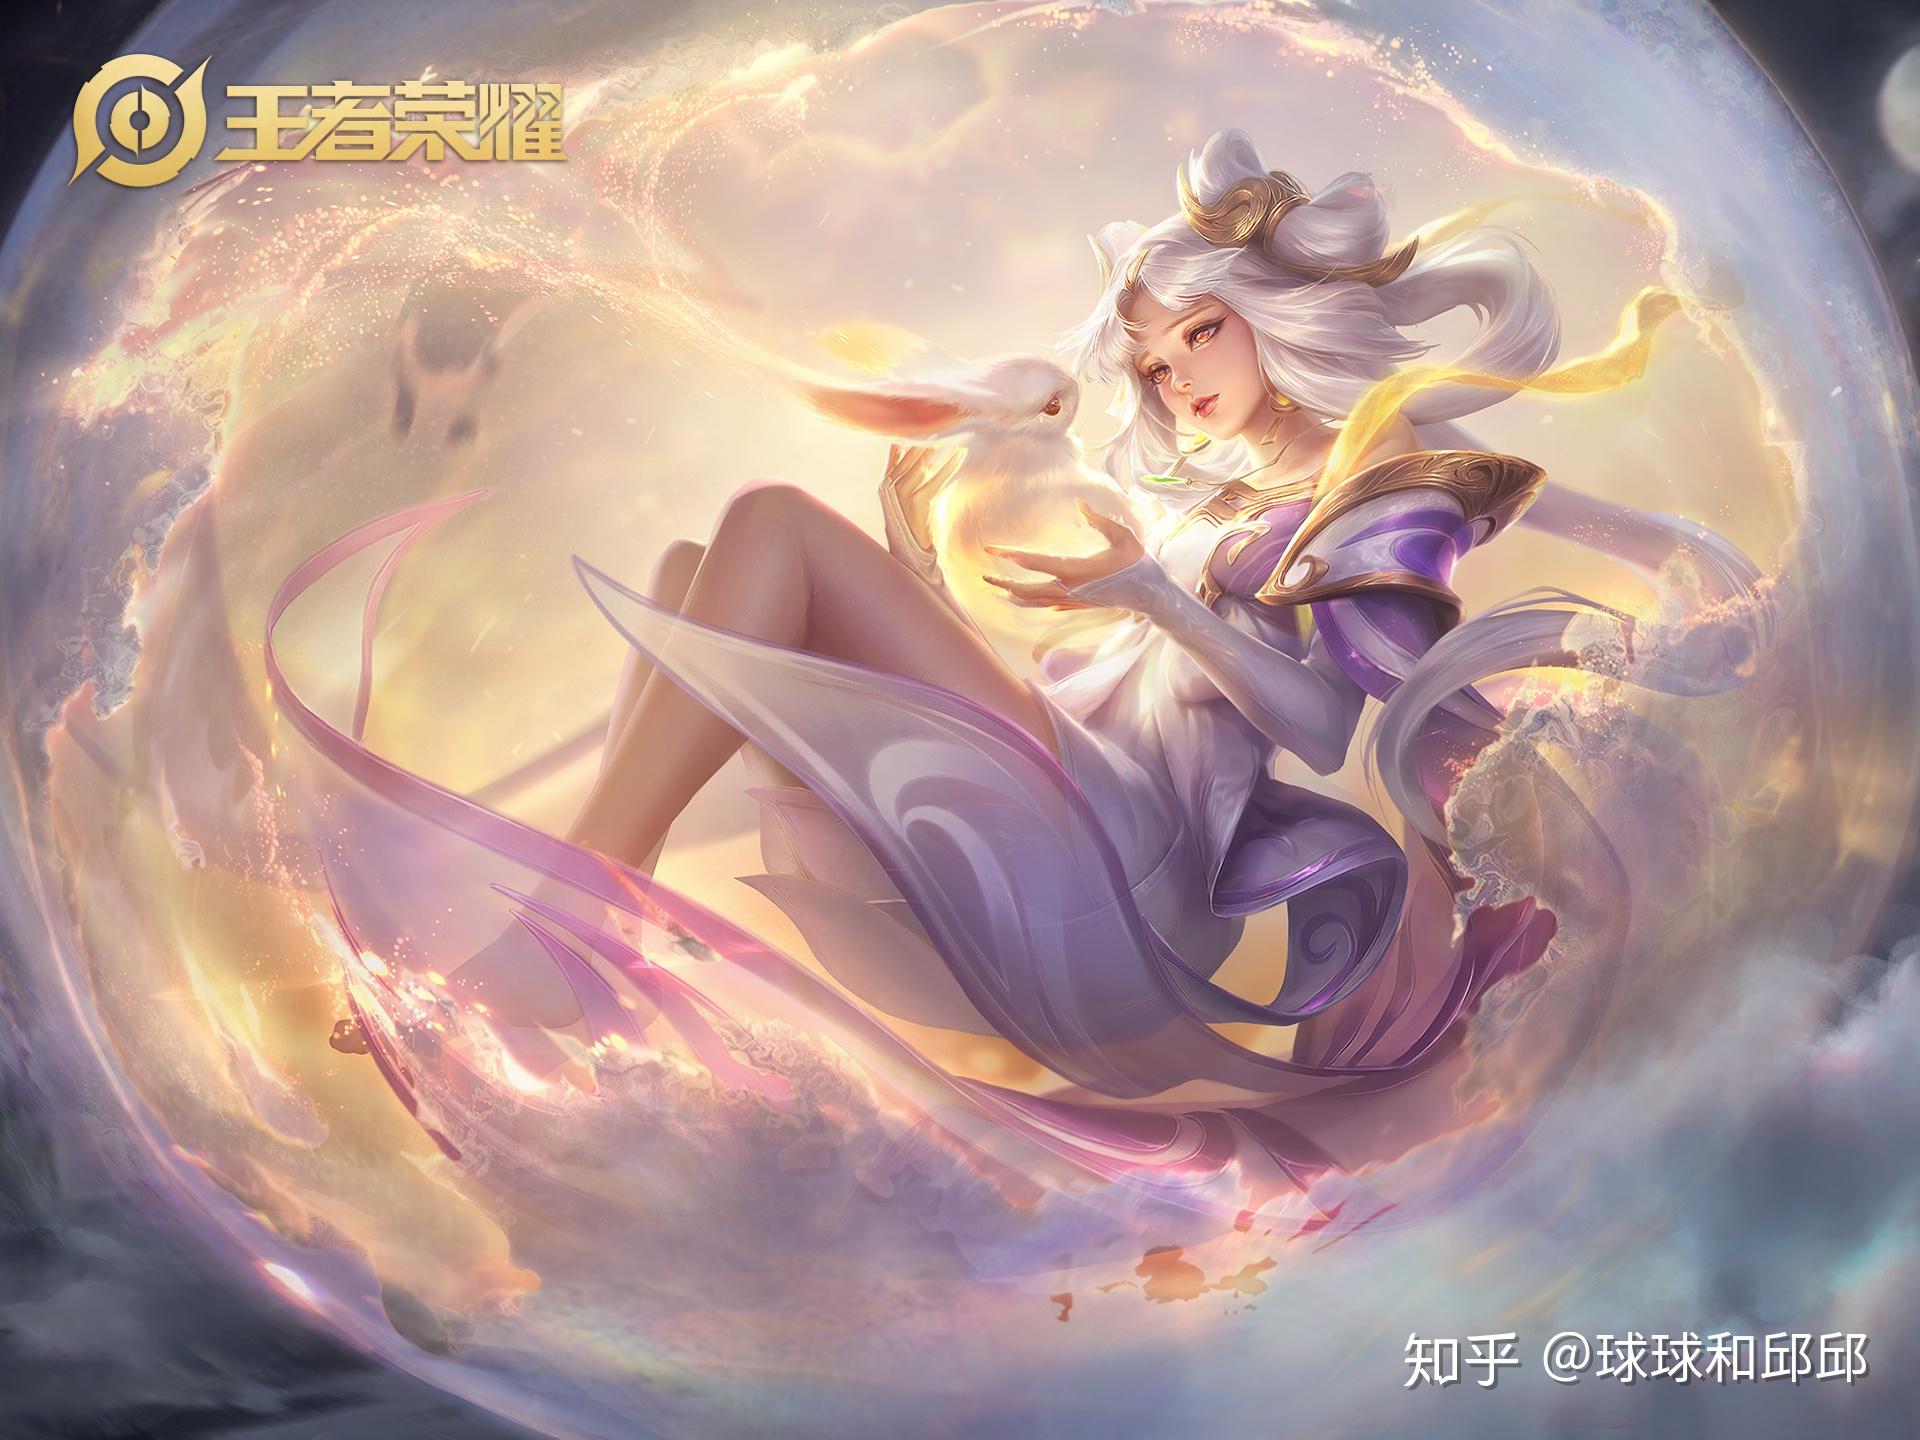 How to play Chang'e, ＂Glory of the King＂, what are the skills and skills？